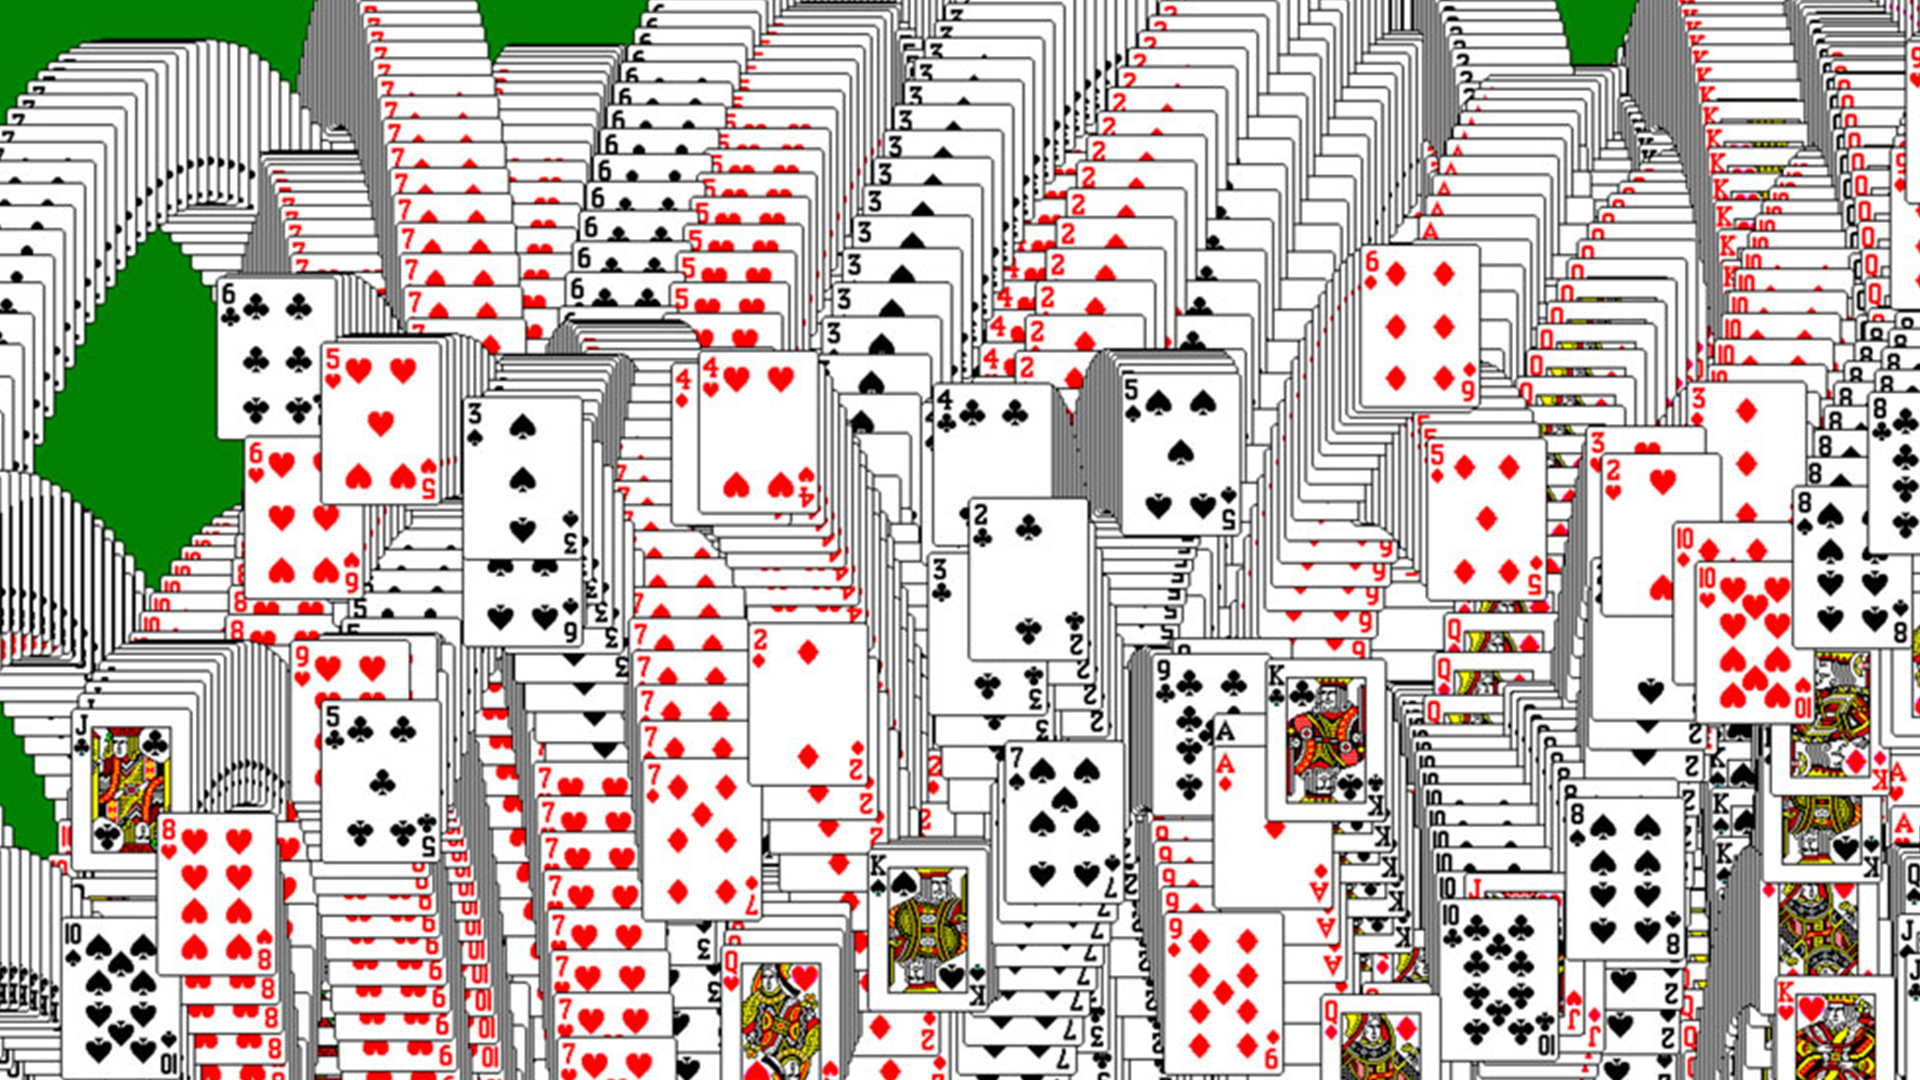 72-year-old solitaire player completes 50,000 games with only 15 losses